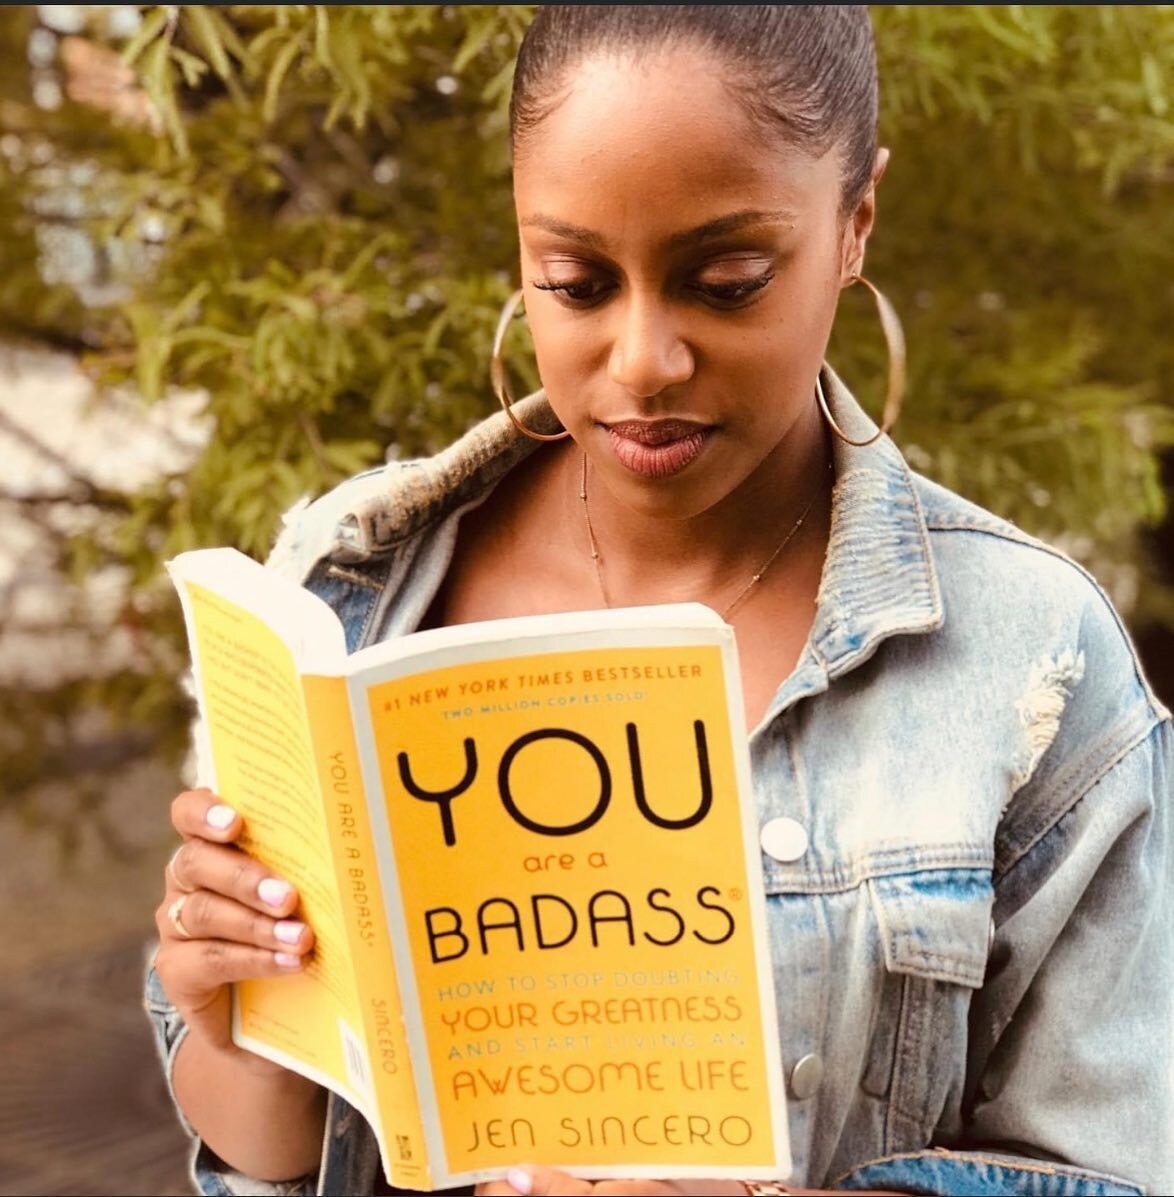 a throwback Completely Booked post but if you needed reminding, you are a badass! Also one of my fav books that I have read like 4 times I think!